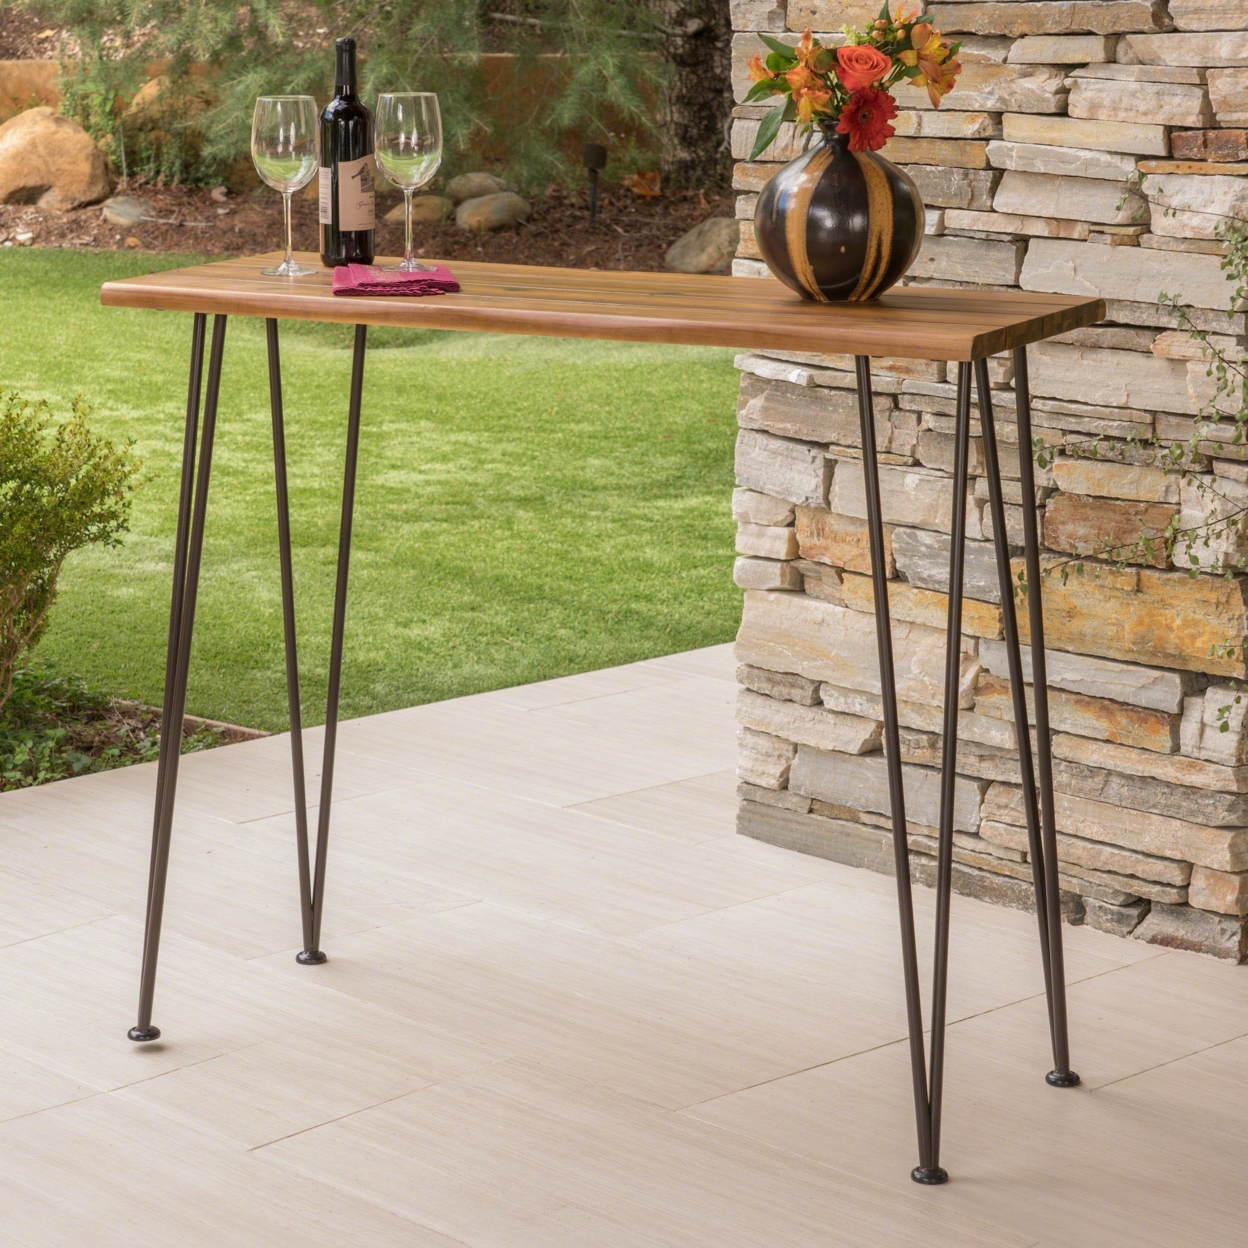 Dione Outdoor Rustic Industrial Acacia Wood Bar Table With Metal Hairpin Legs